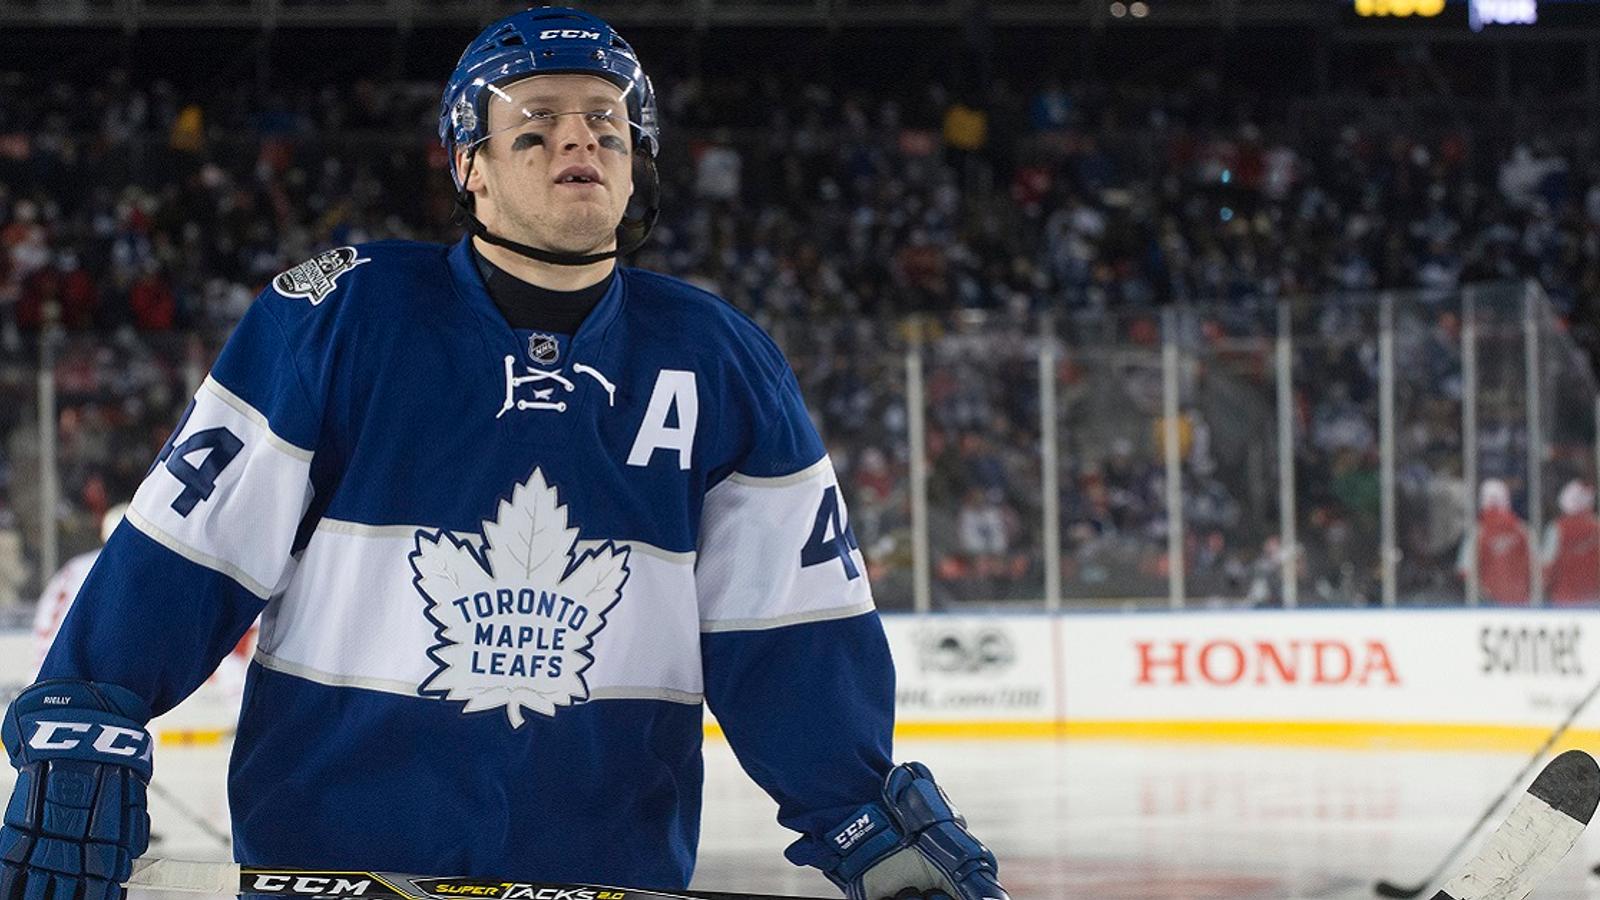 NHL Player Safety confirms bad news for Morgan Rielly.